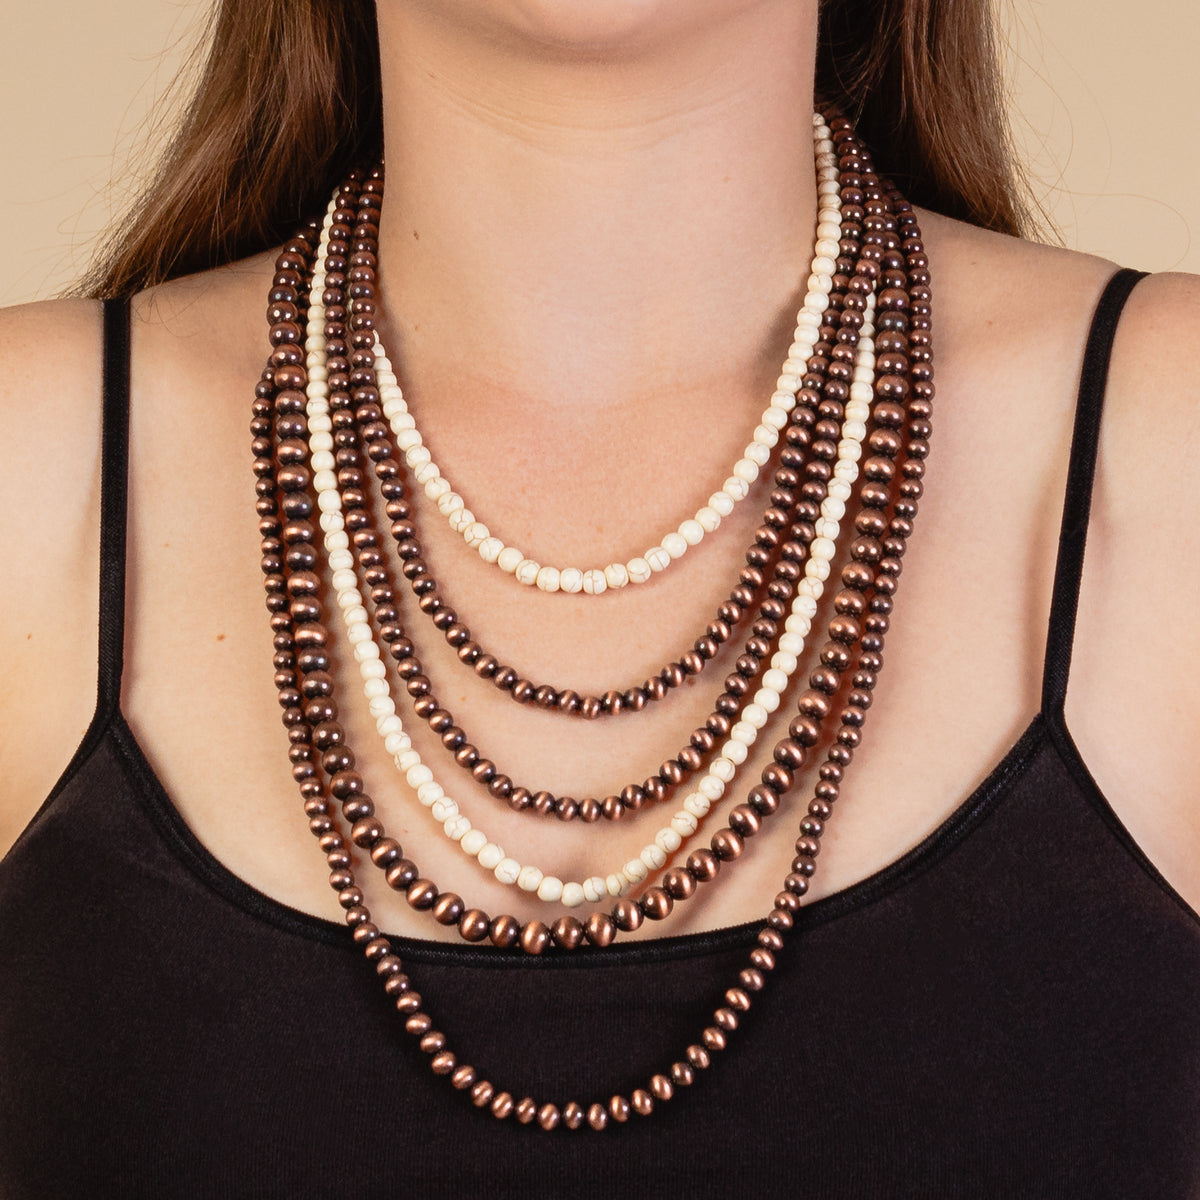 92036 - Layered Beaded Necklace - Ivory & Copper